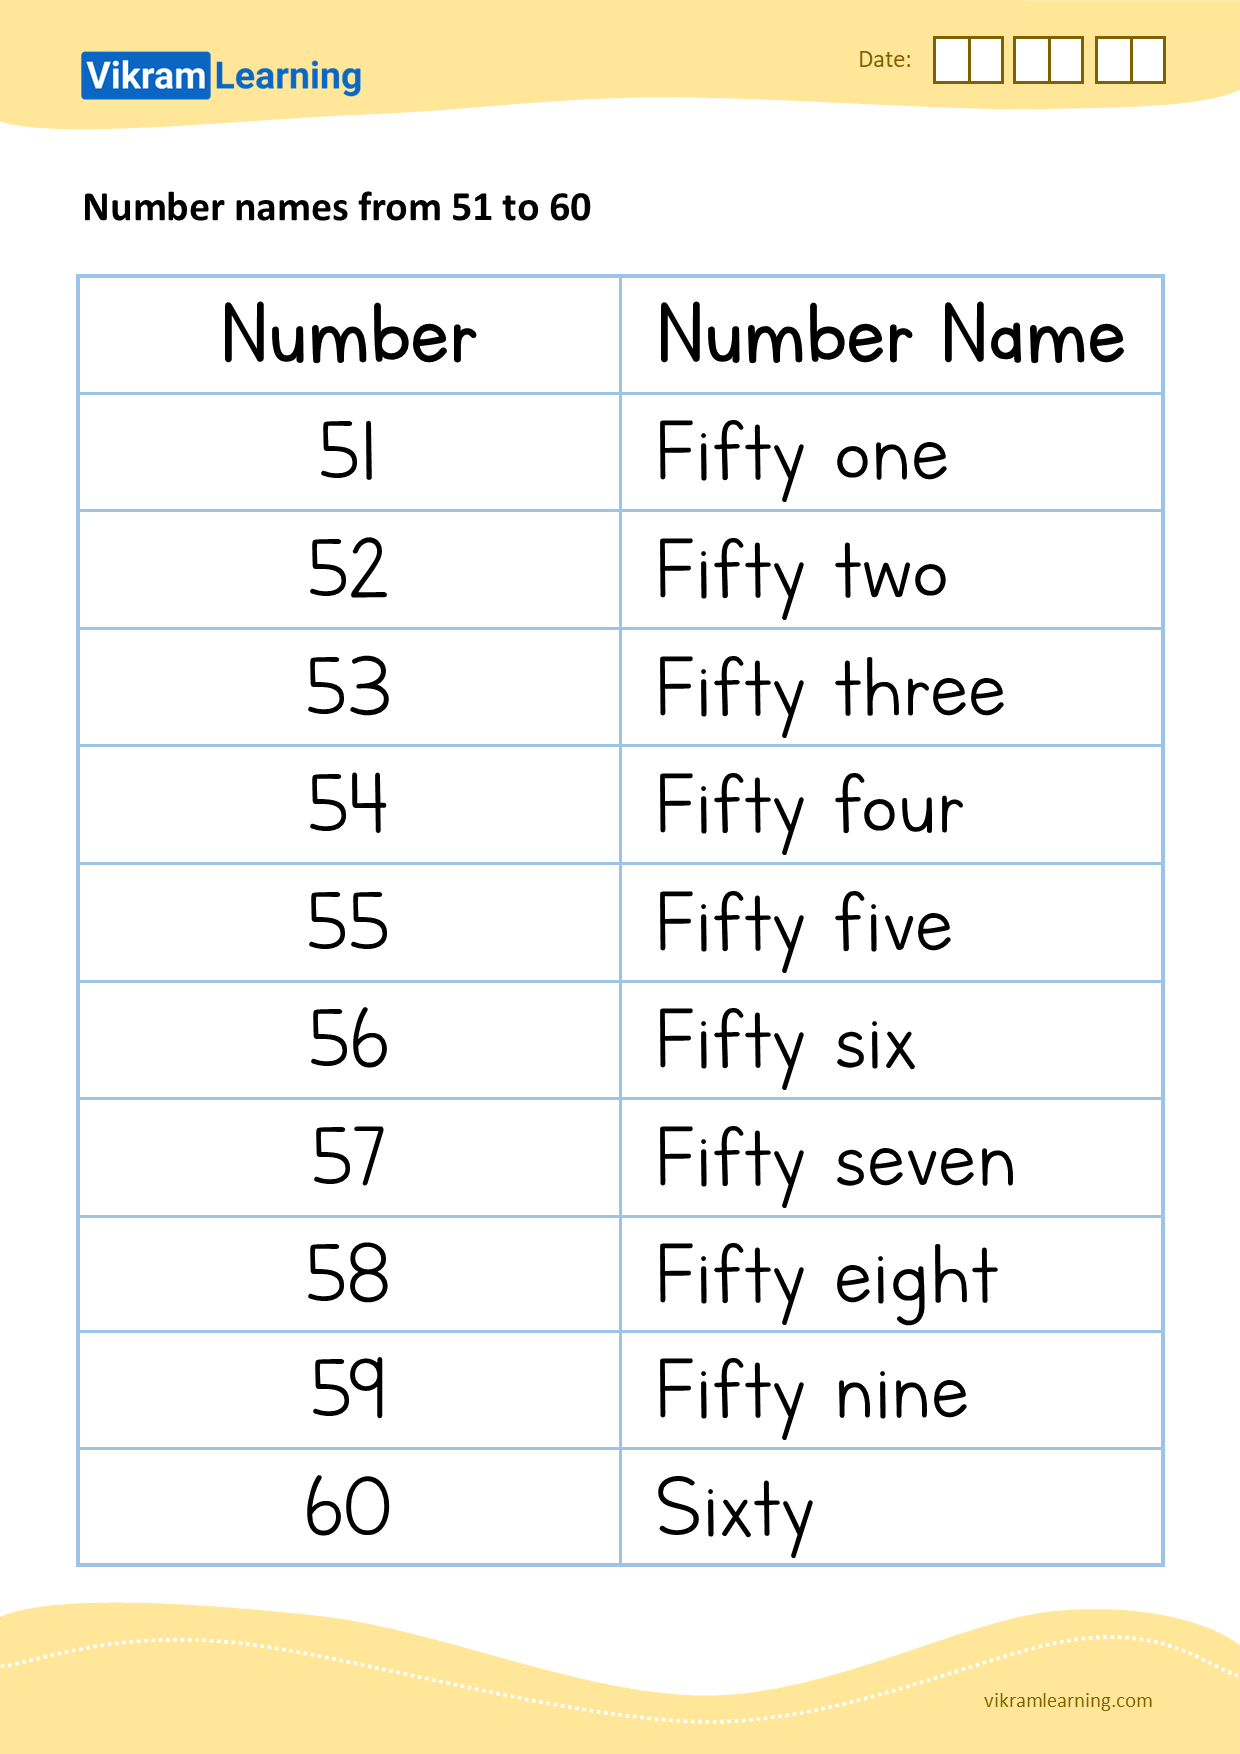 download-number-names-from-51-to-60-worksheets-for-free-vikramlearning